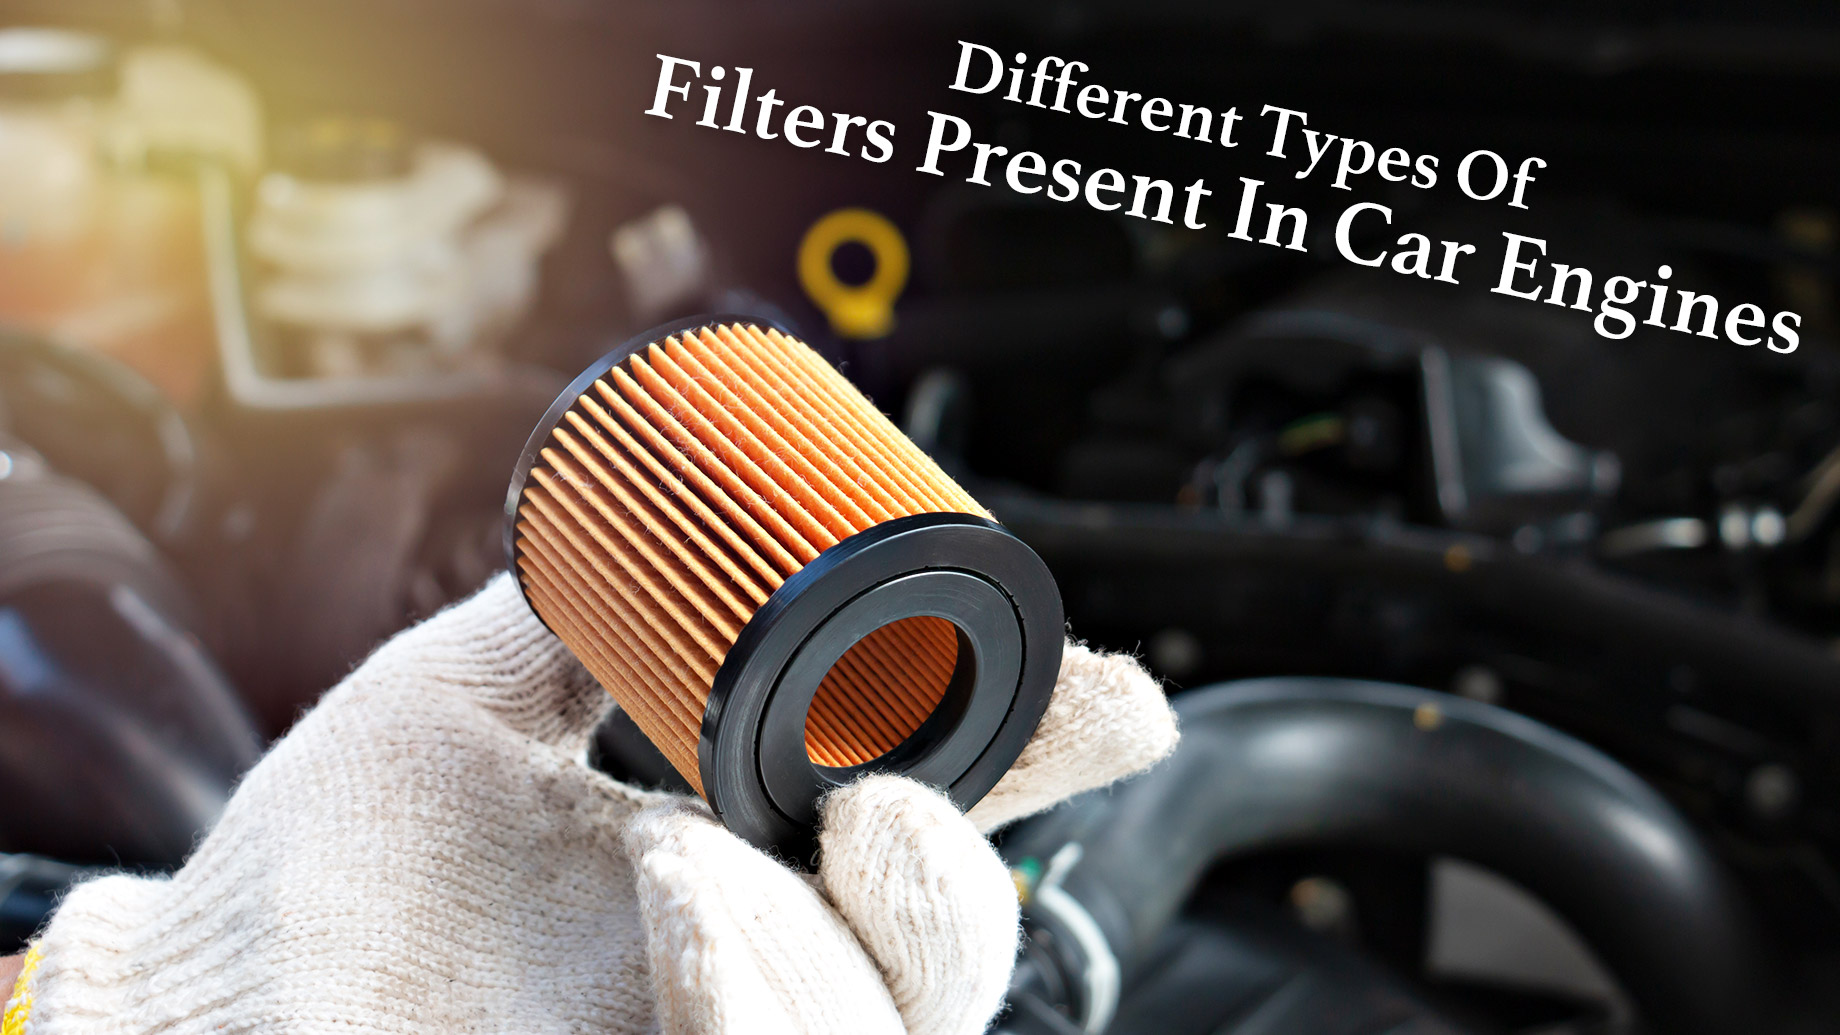 Different Types Of Filters Present In Car Engines